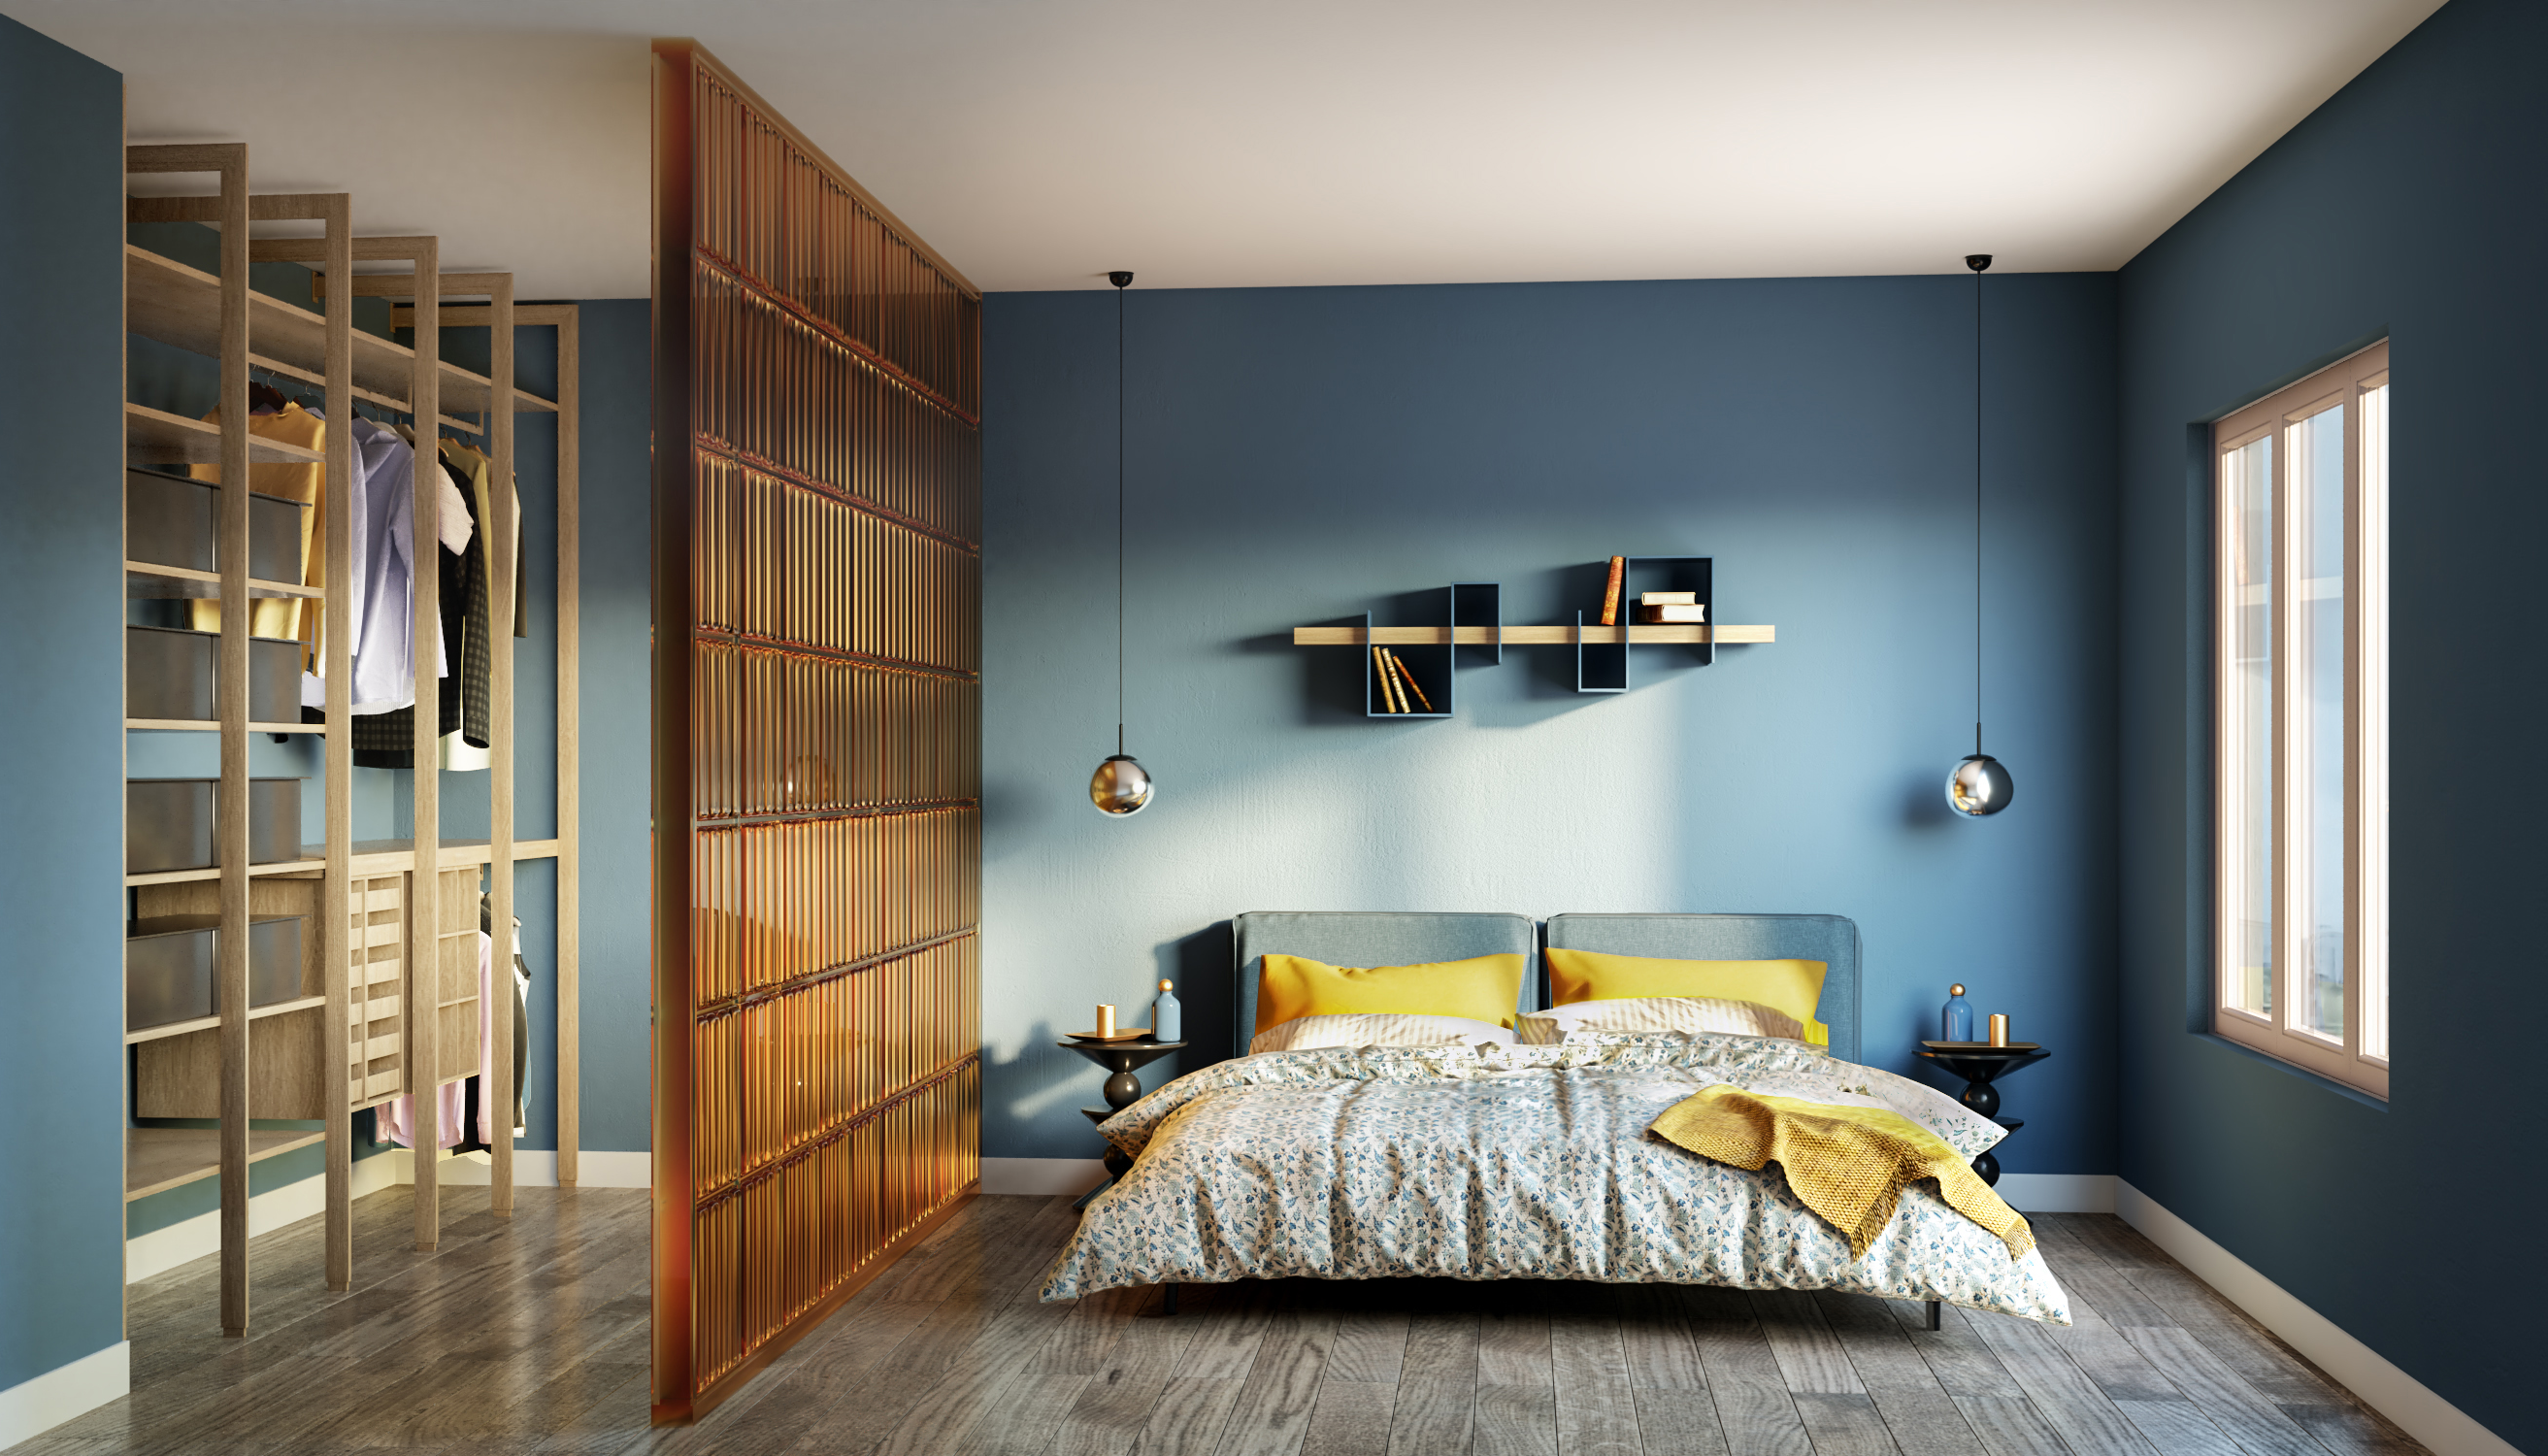 Modern Open Wardrobe Design With A Wooden Finish